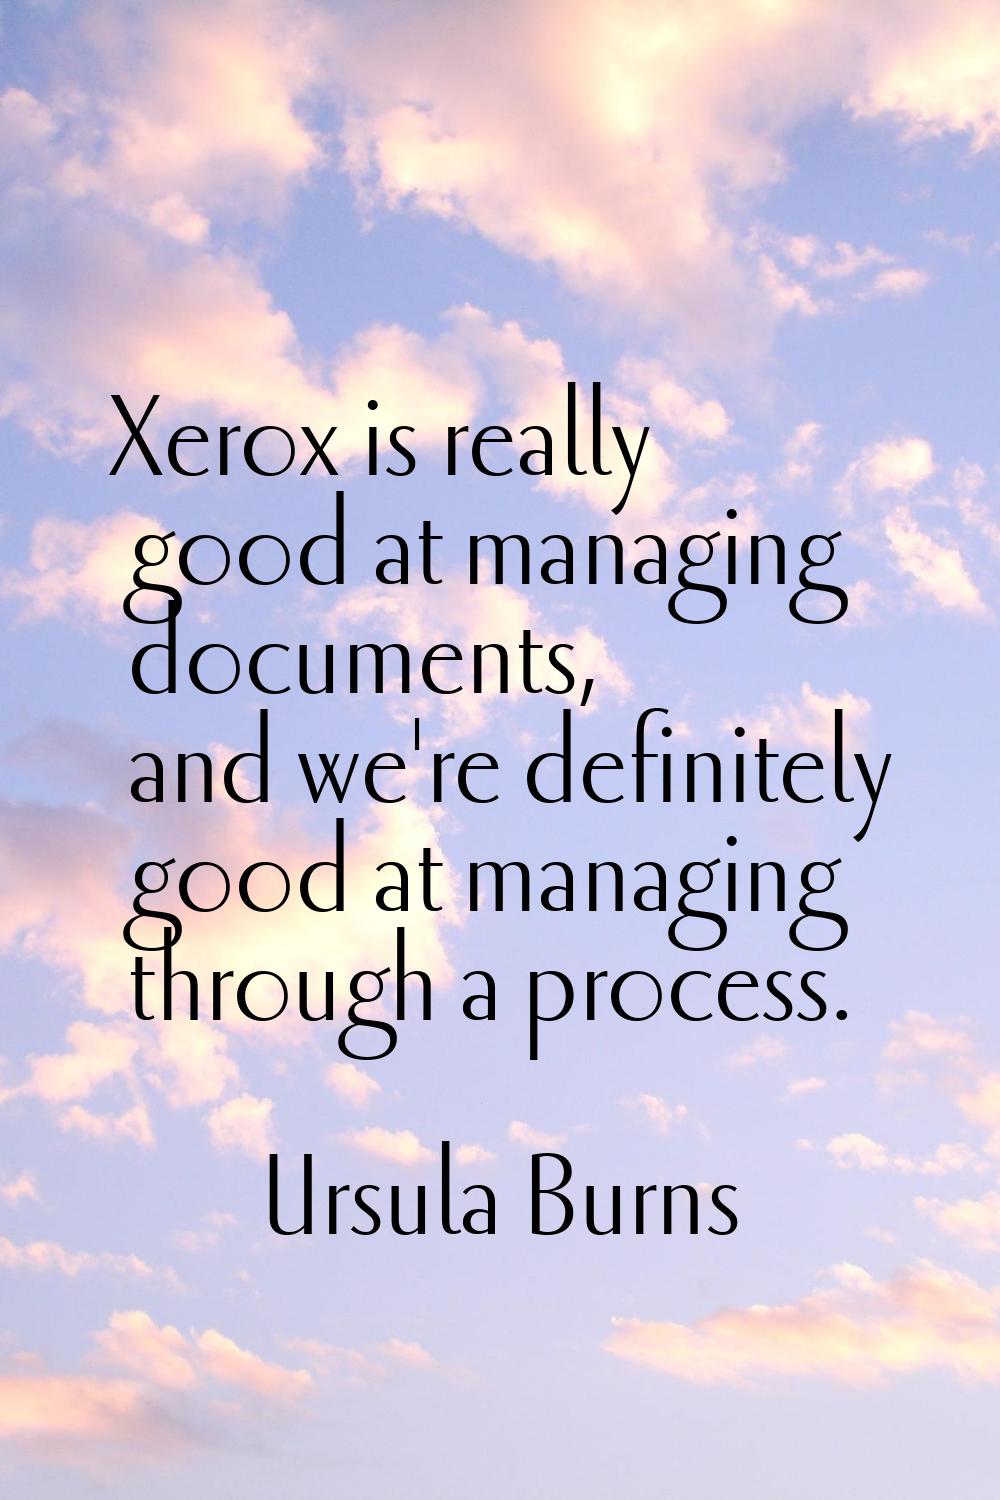 Xerox is really good at managing documents, and we're definitely good at managing through a process